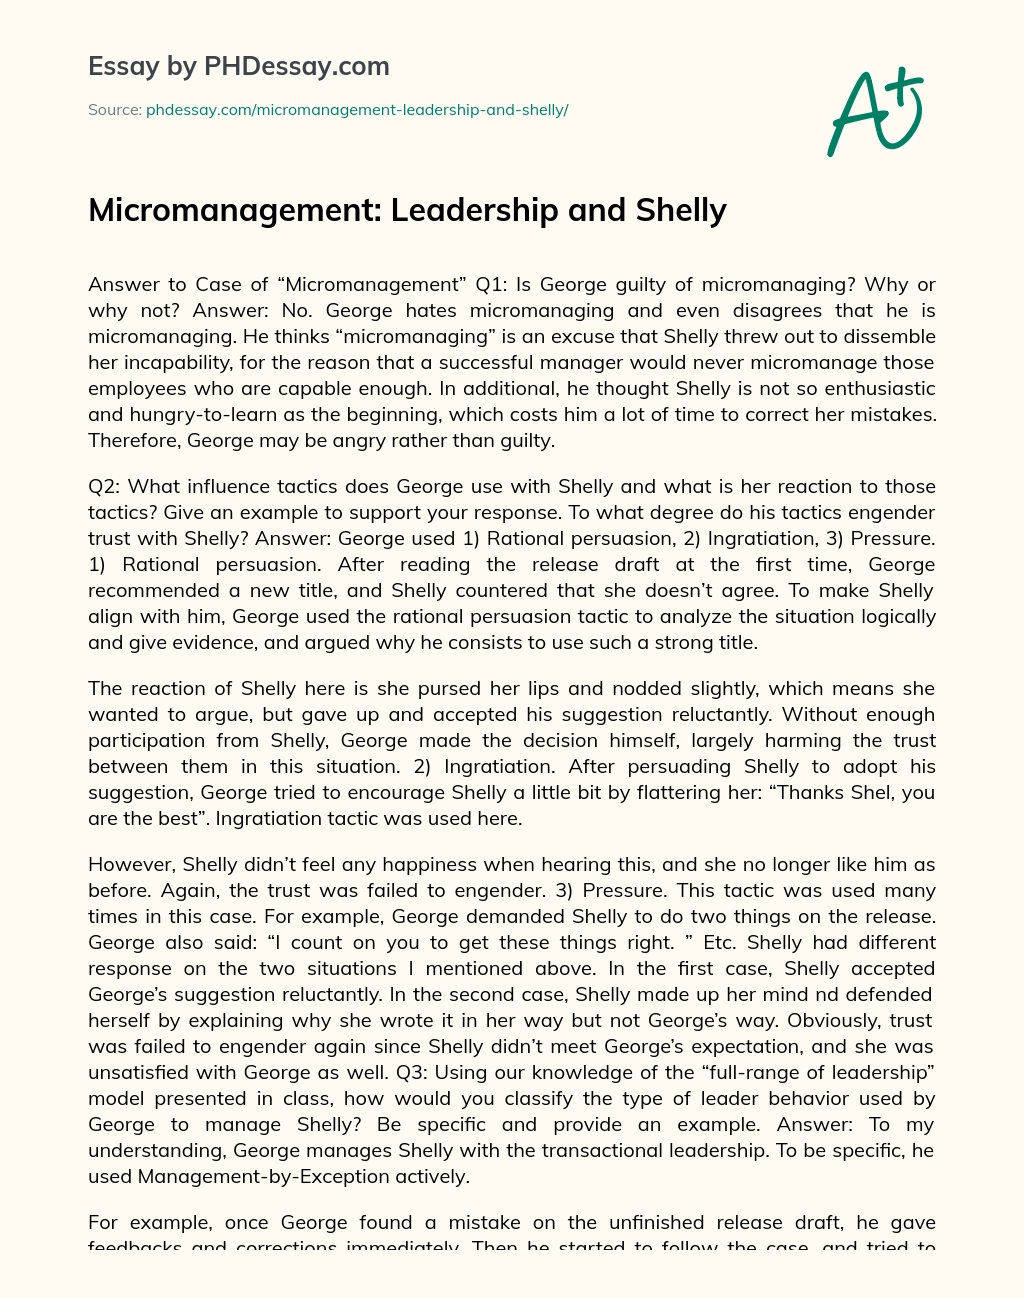 Micromanagement: Leadership and Shelly essay